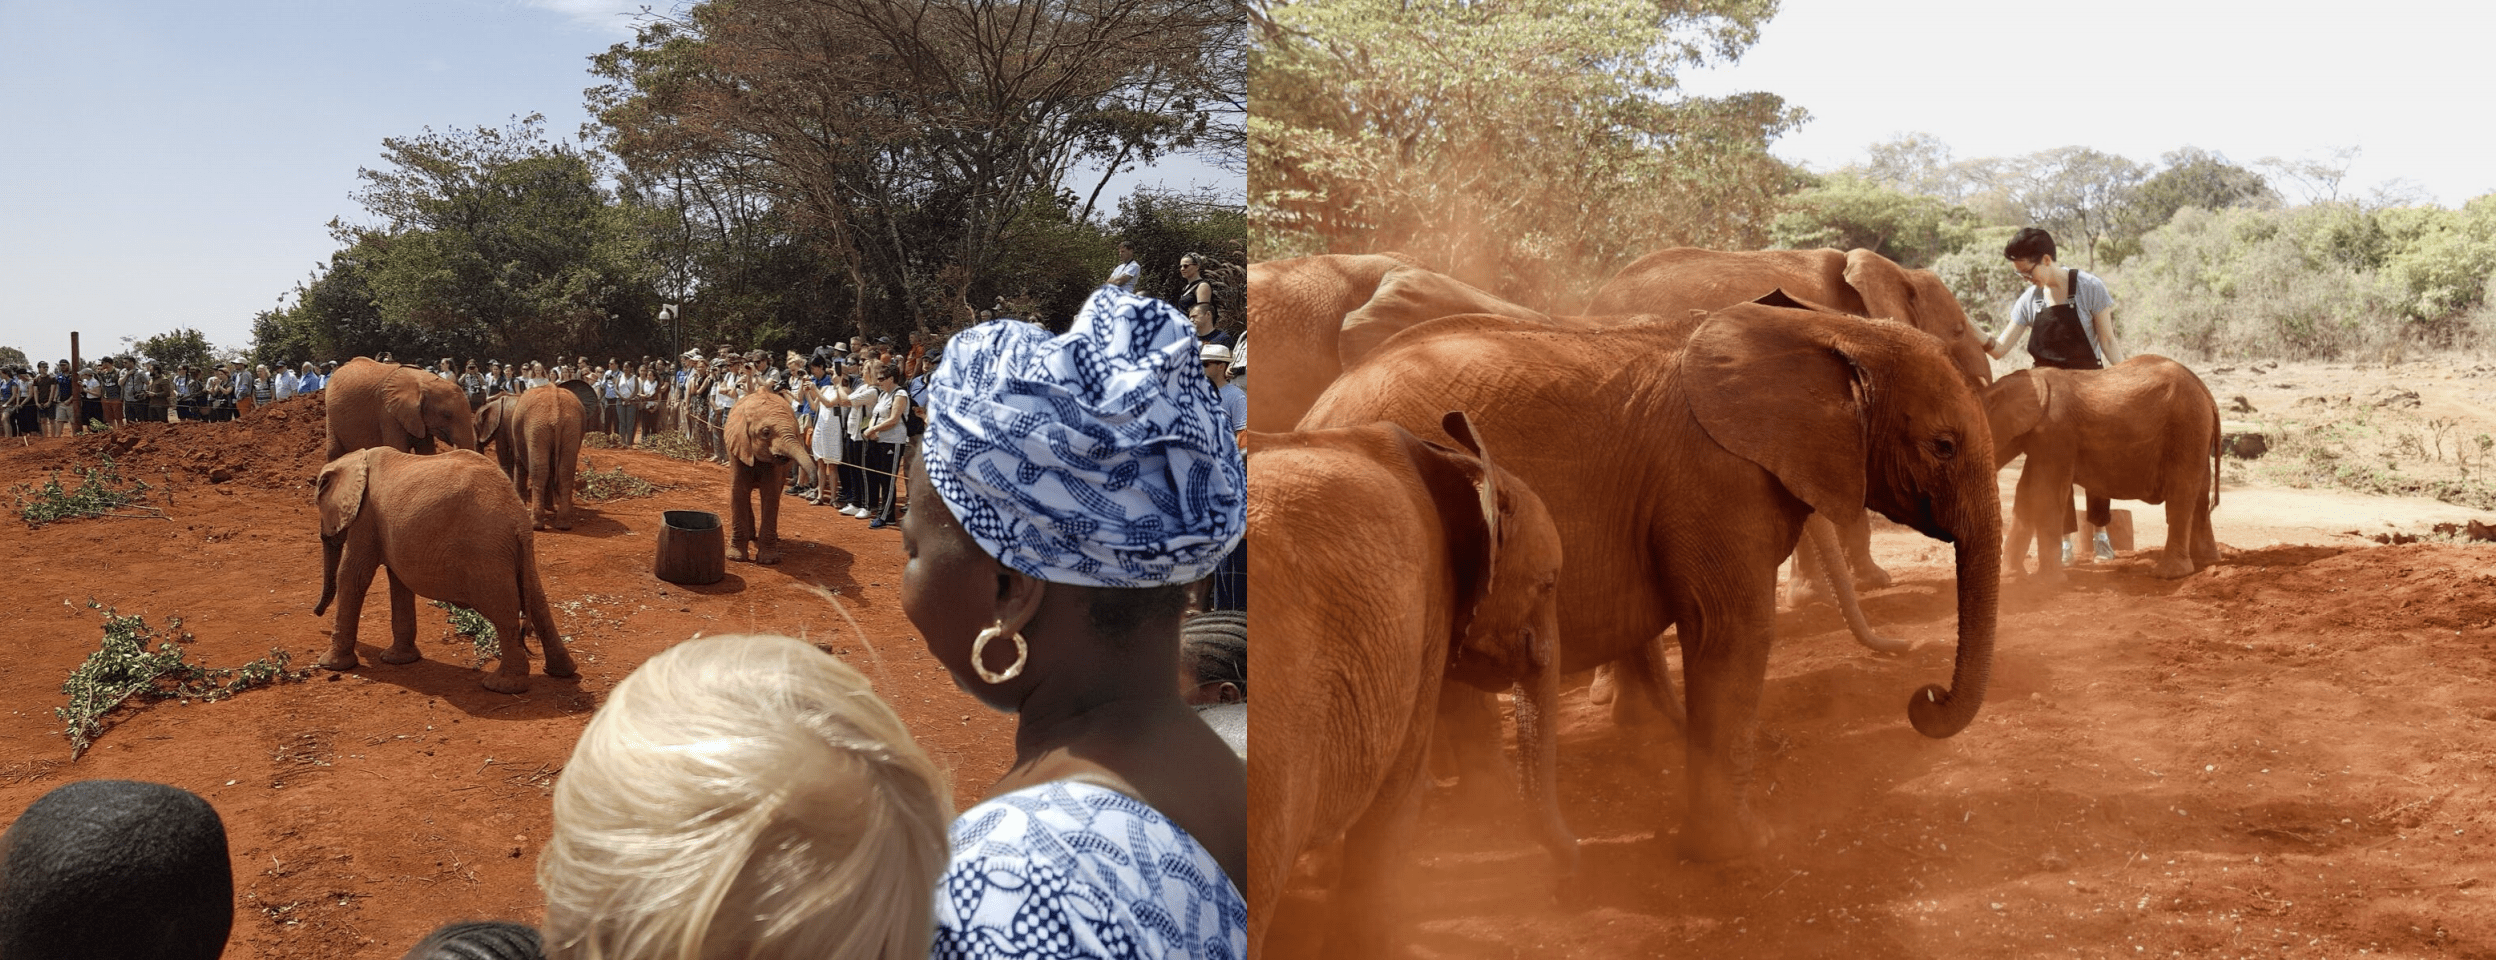 How to Outsmart Overtourism: 5 Tips for Responsible Travel, Elephants